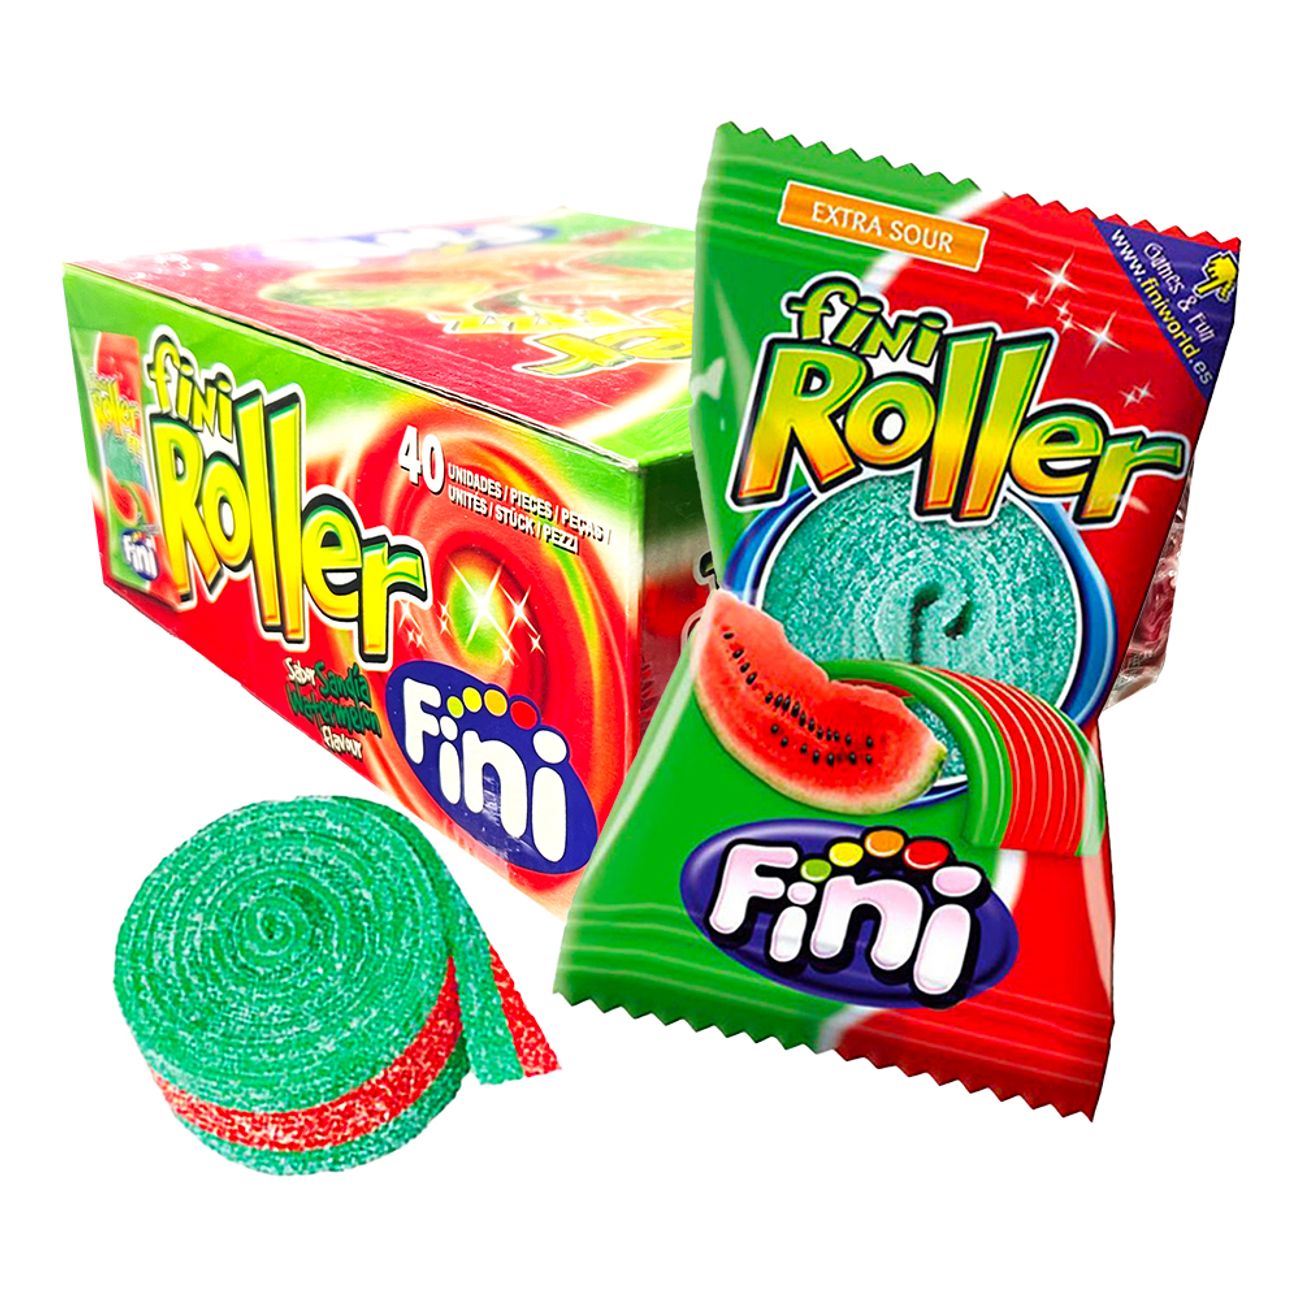 fini-roller-melon-storpack-95158-2